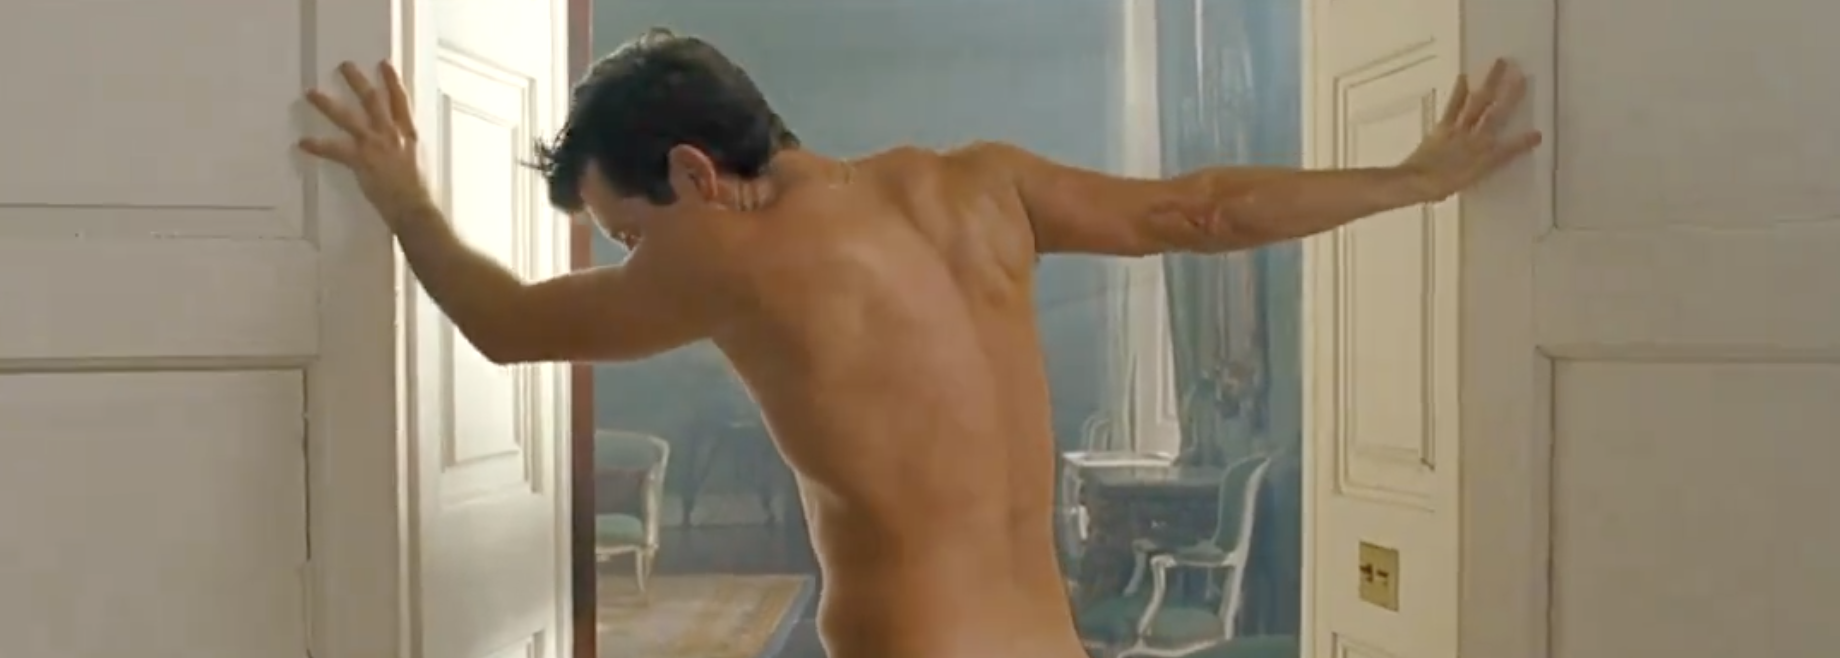 Barry seen naked from the waist up from the back, standing in a doorway